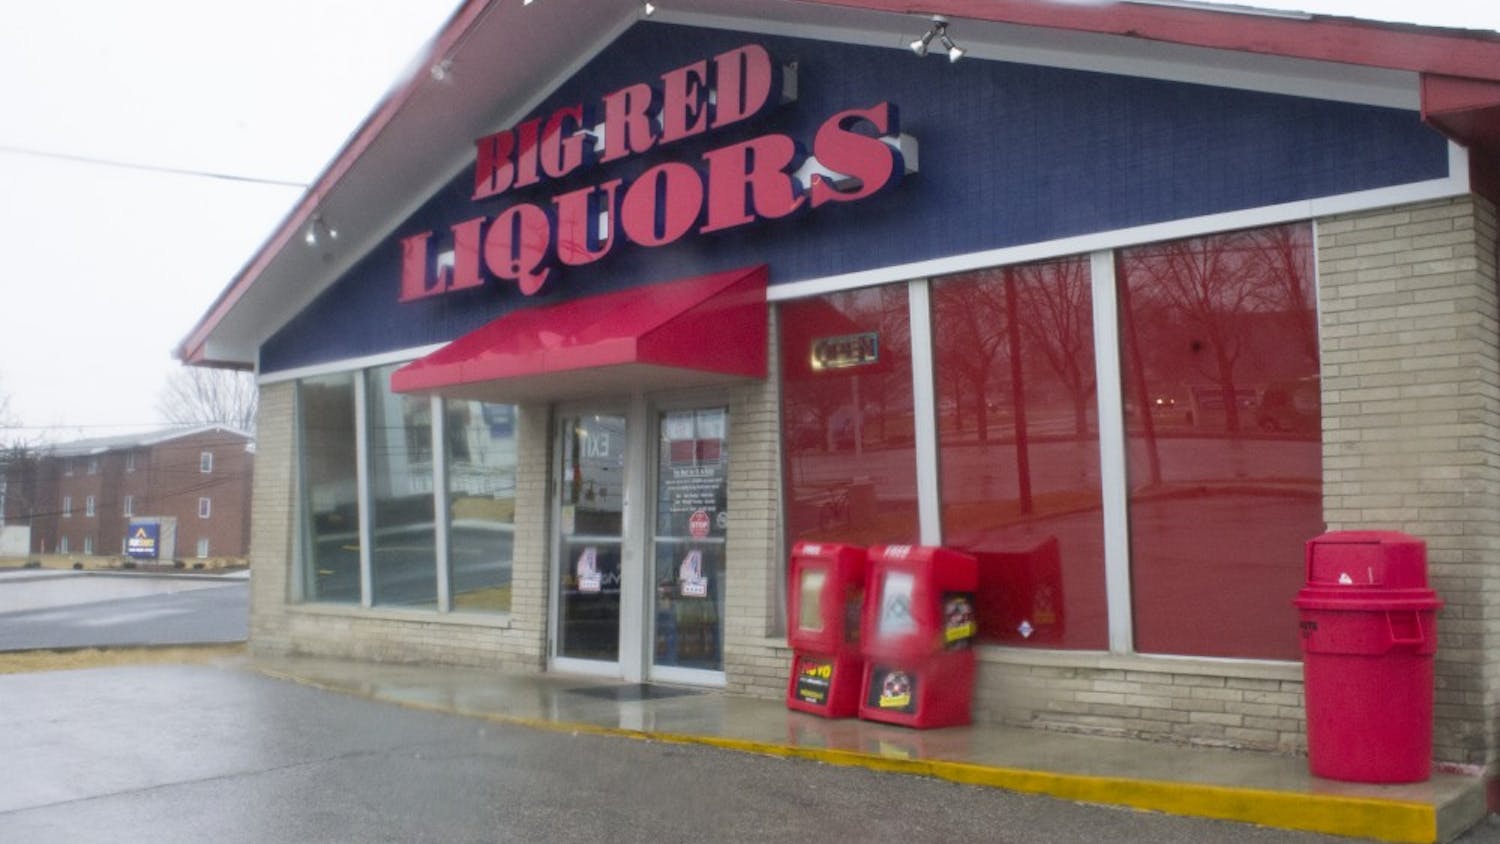 Senate Bill 1 would allow convenience, drug and liquor stores to sell alcohol from noon to 8 p.m. on Sundays. Big Red Liquors is just one of the companies affected by the current ban on Sunday alcohol sales.